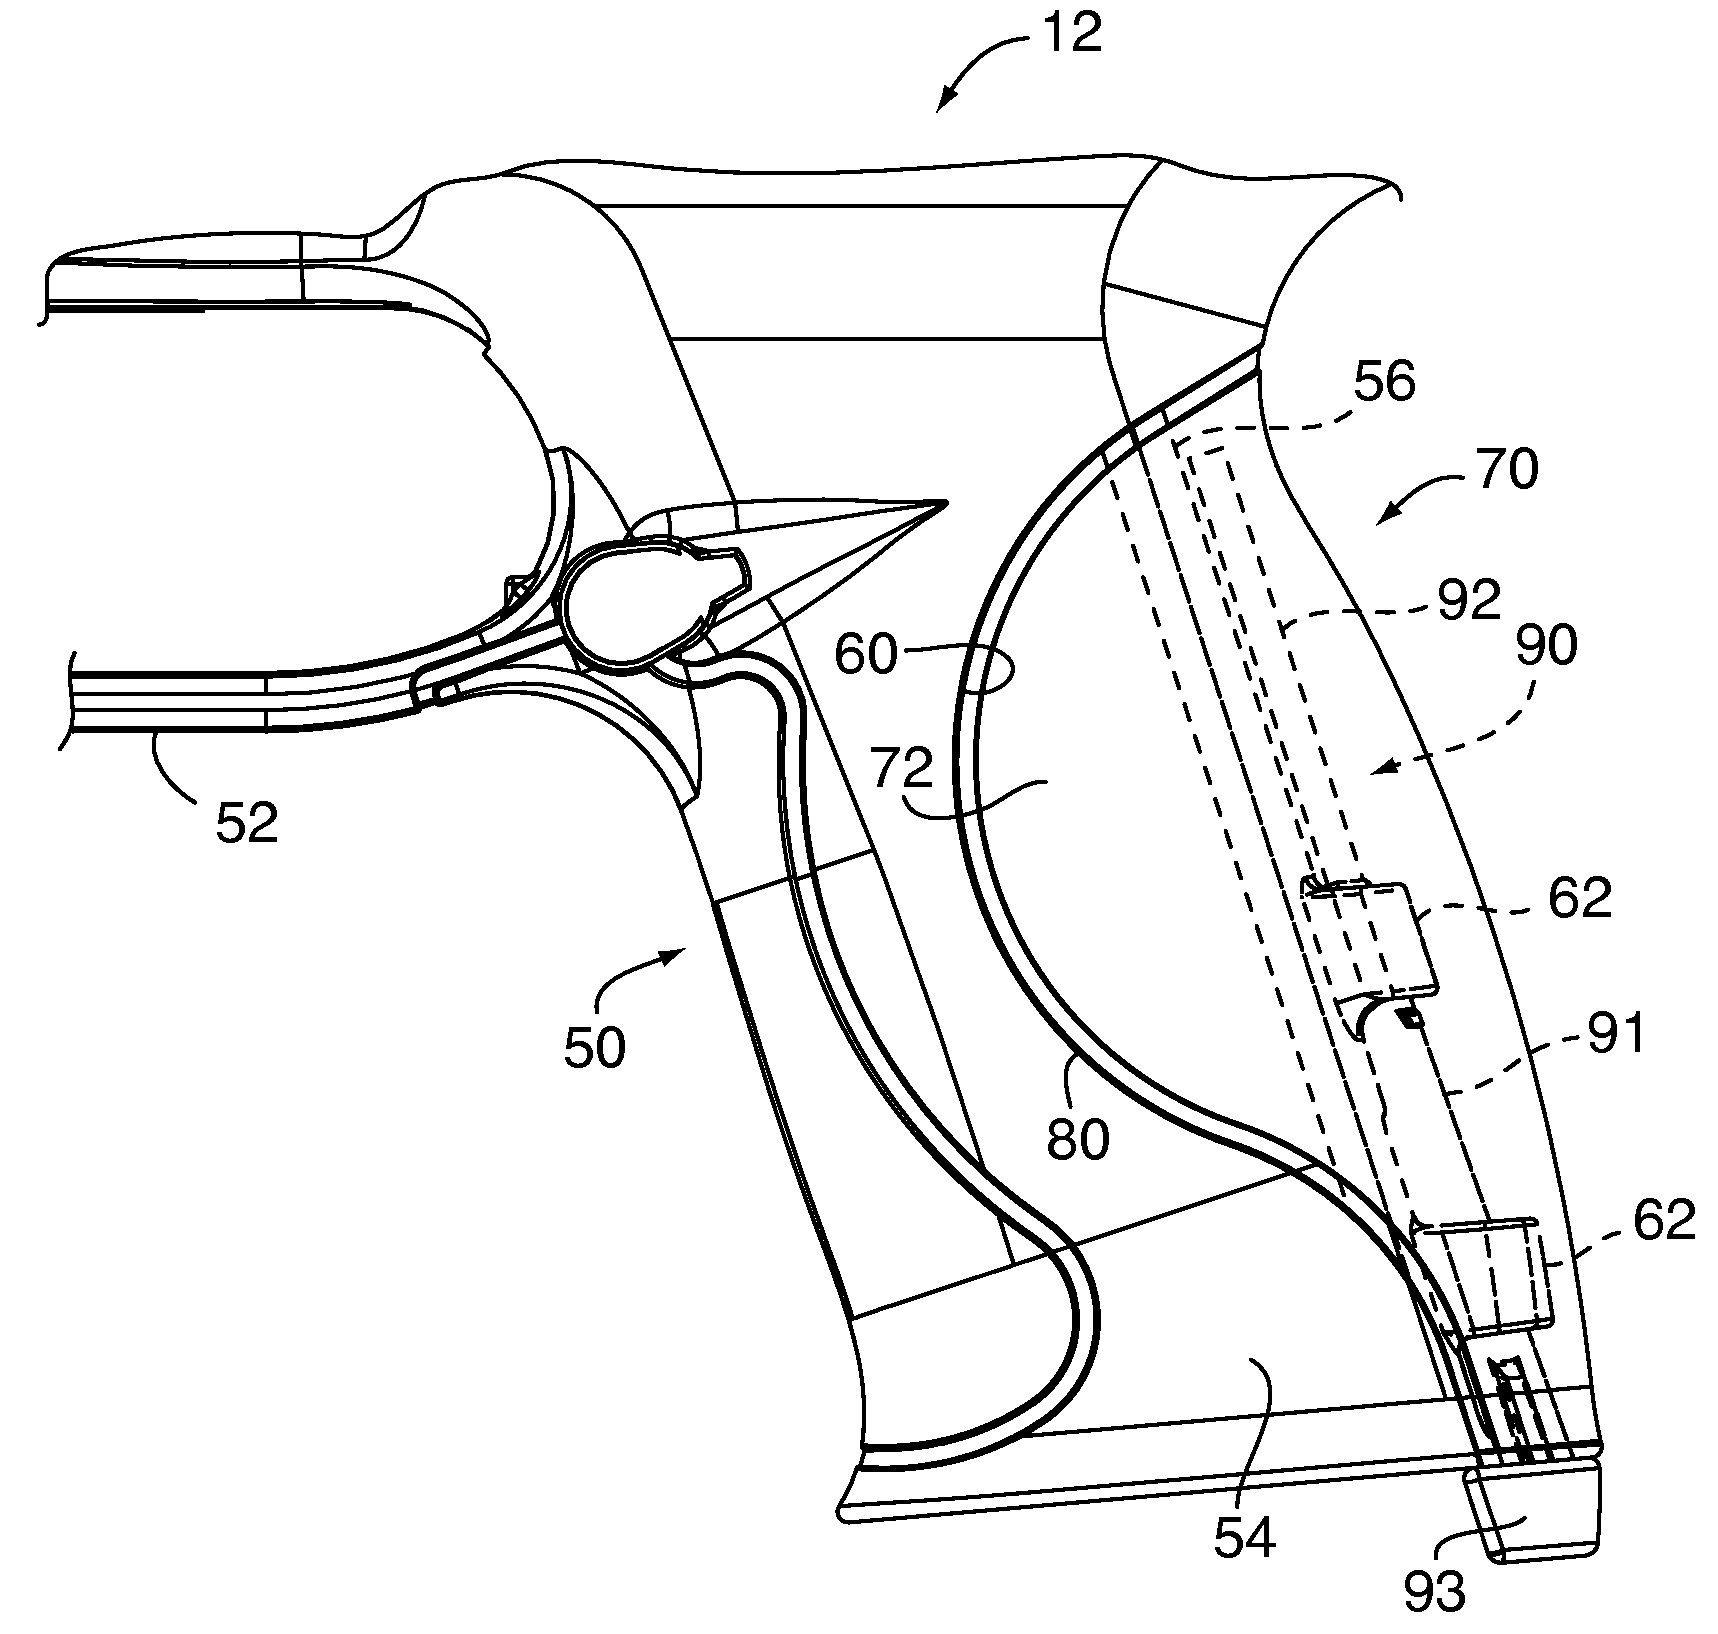 Firearm frame with configurable grip